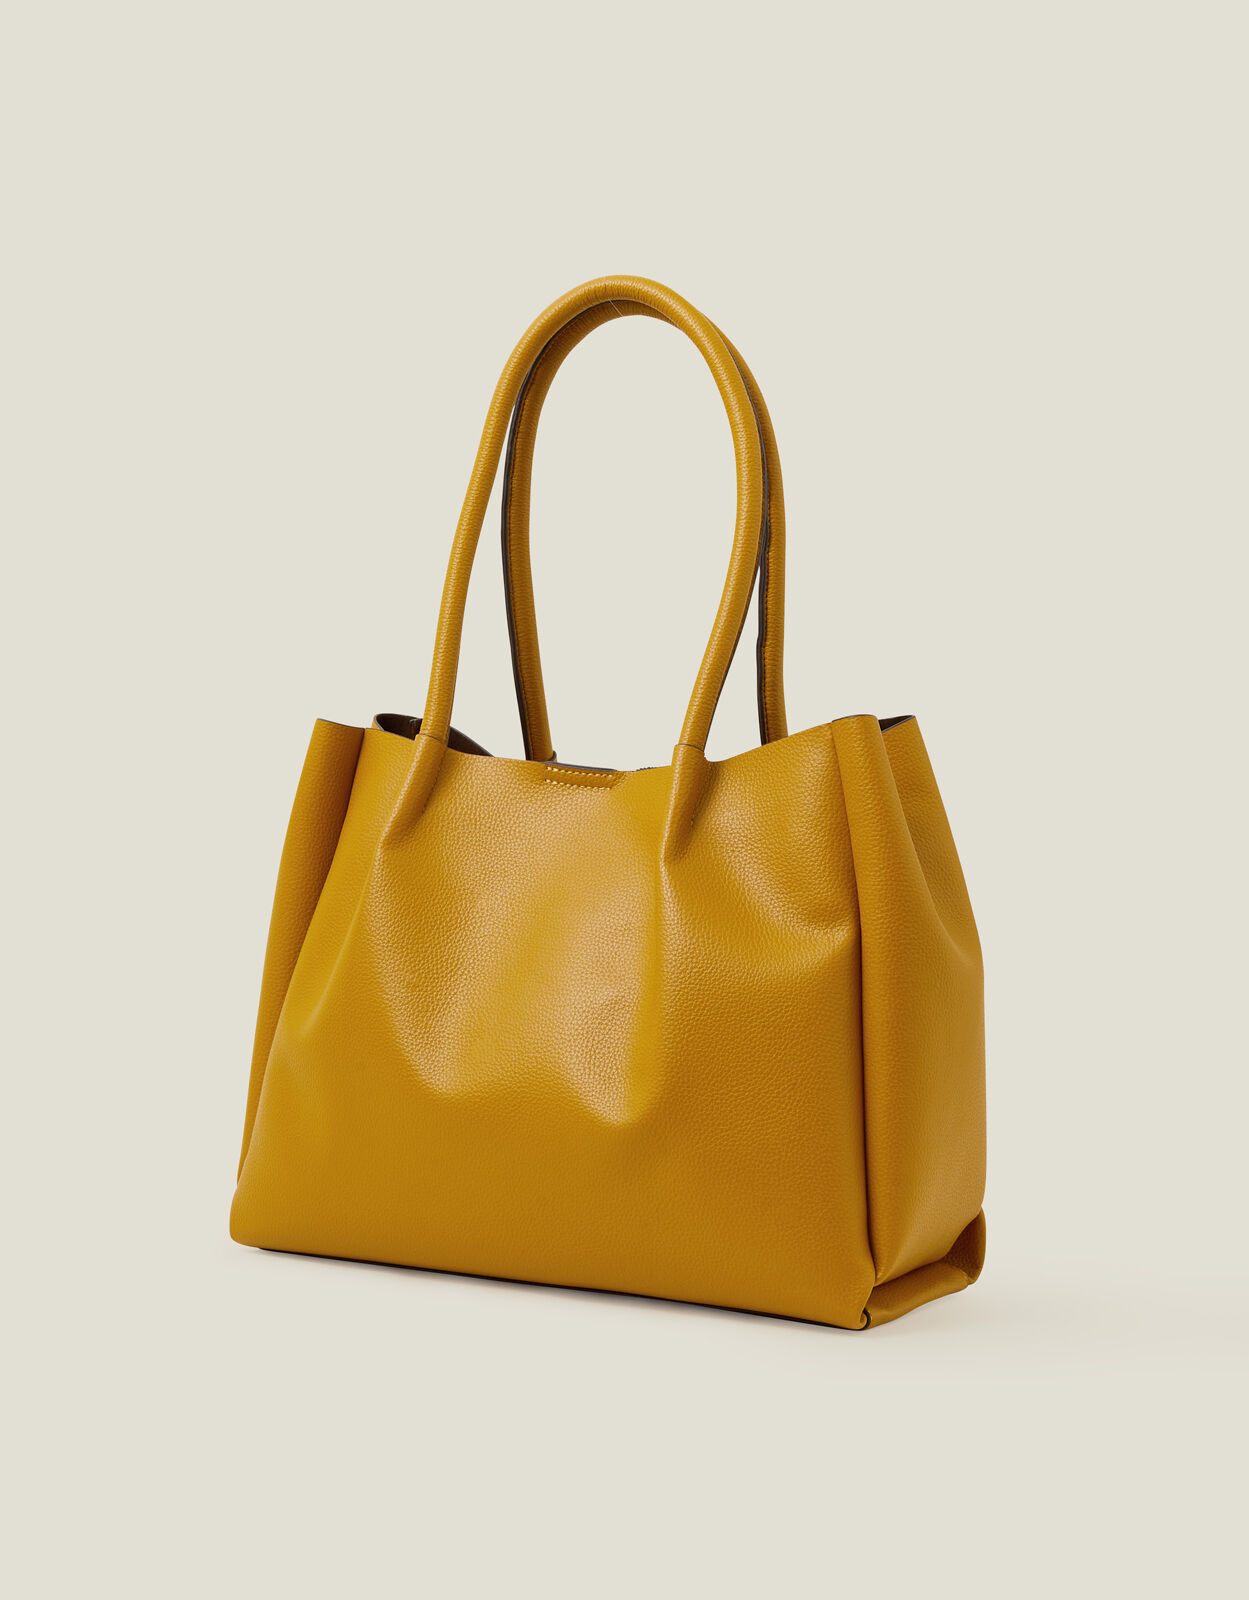 TUSK NEW YORK | Handcrafted Modern Leather Bags & Accessories